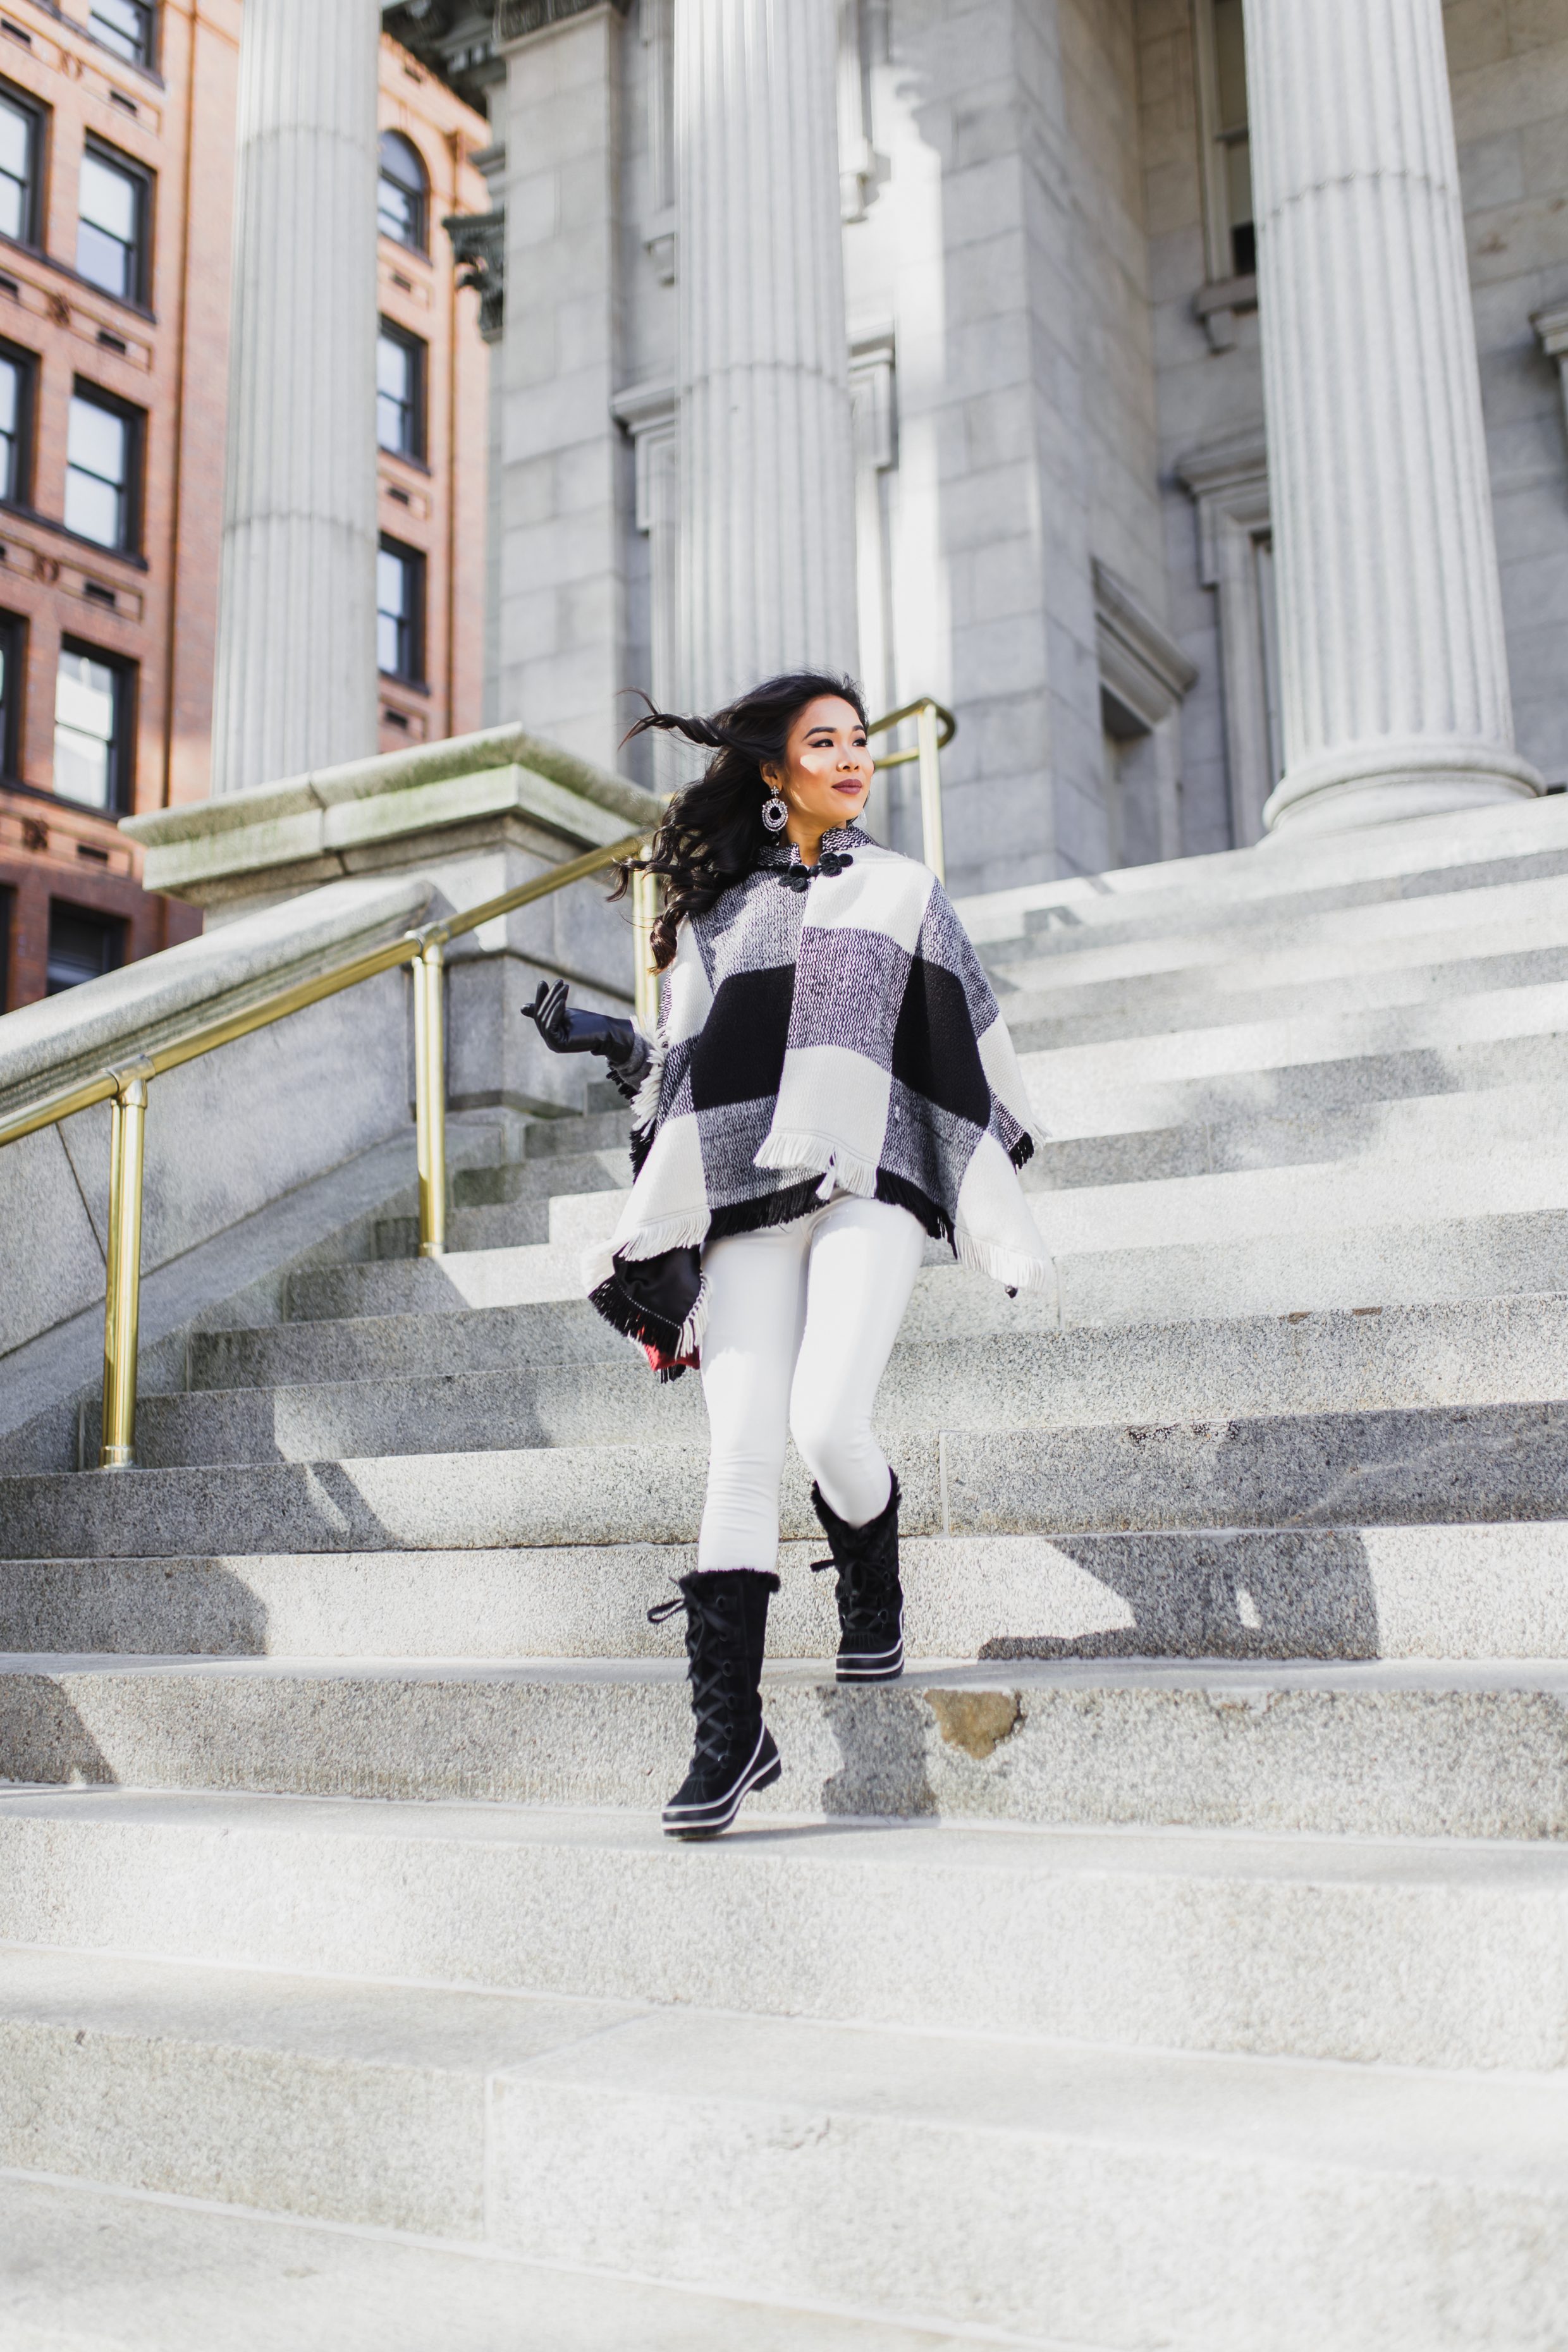 The best winter boots and black and white poncho